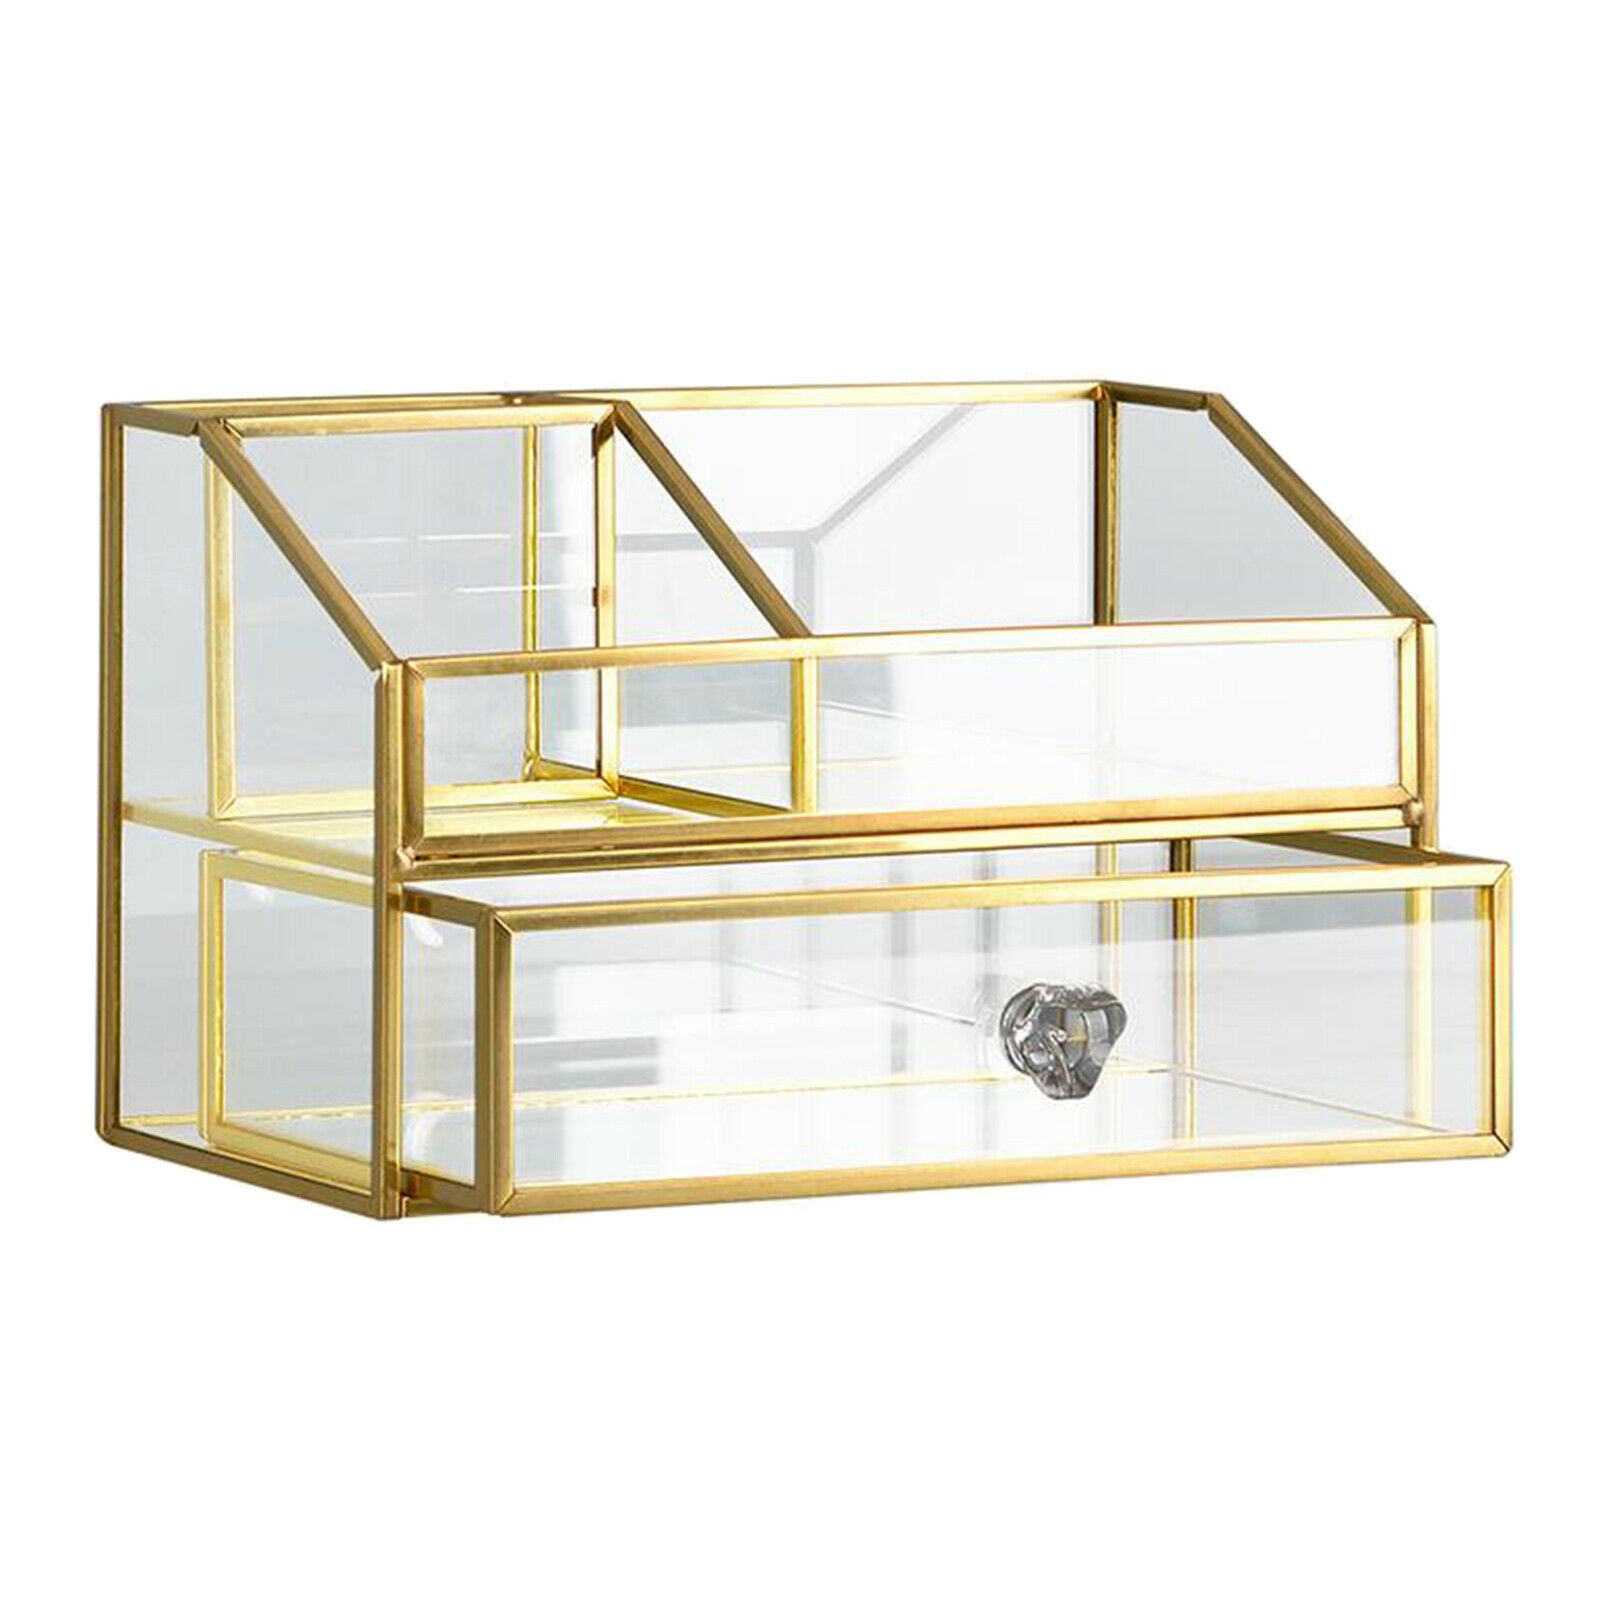 Glass Makeup Organizer, Large Cosmetic Display Cases Trapezoid Cosmetic and